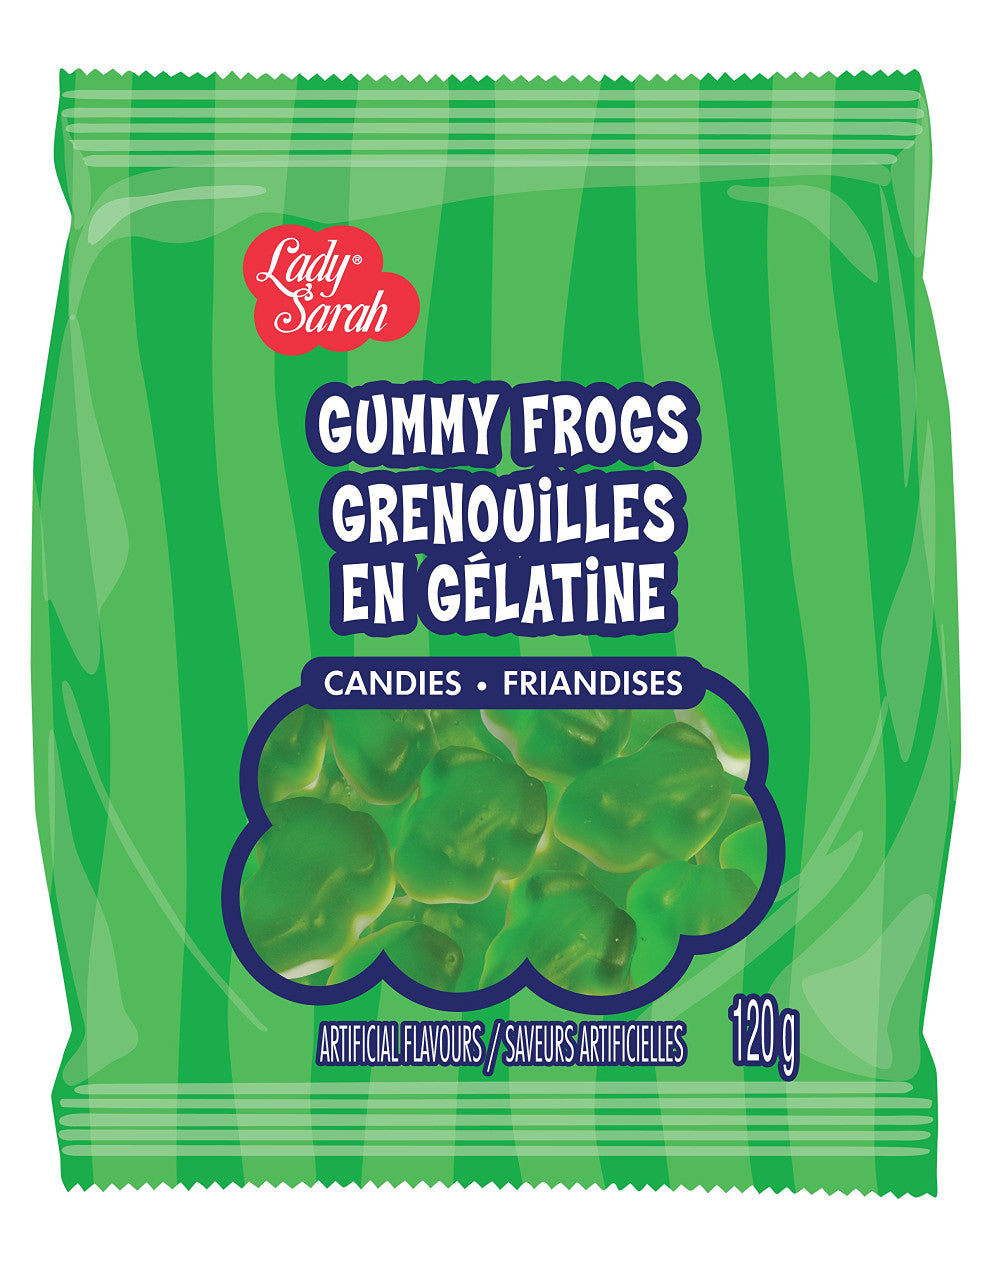 Lady Sarah Gummy Frogs, 120g/4.2oz. Per Bag, {Imported from Canada}